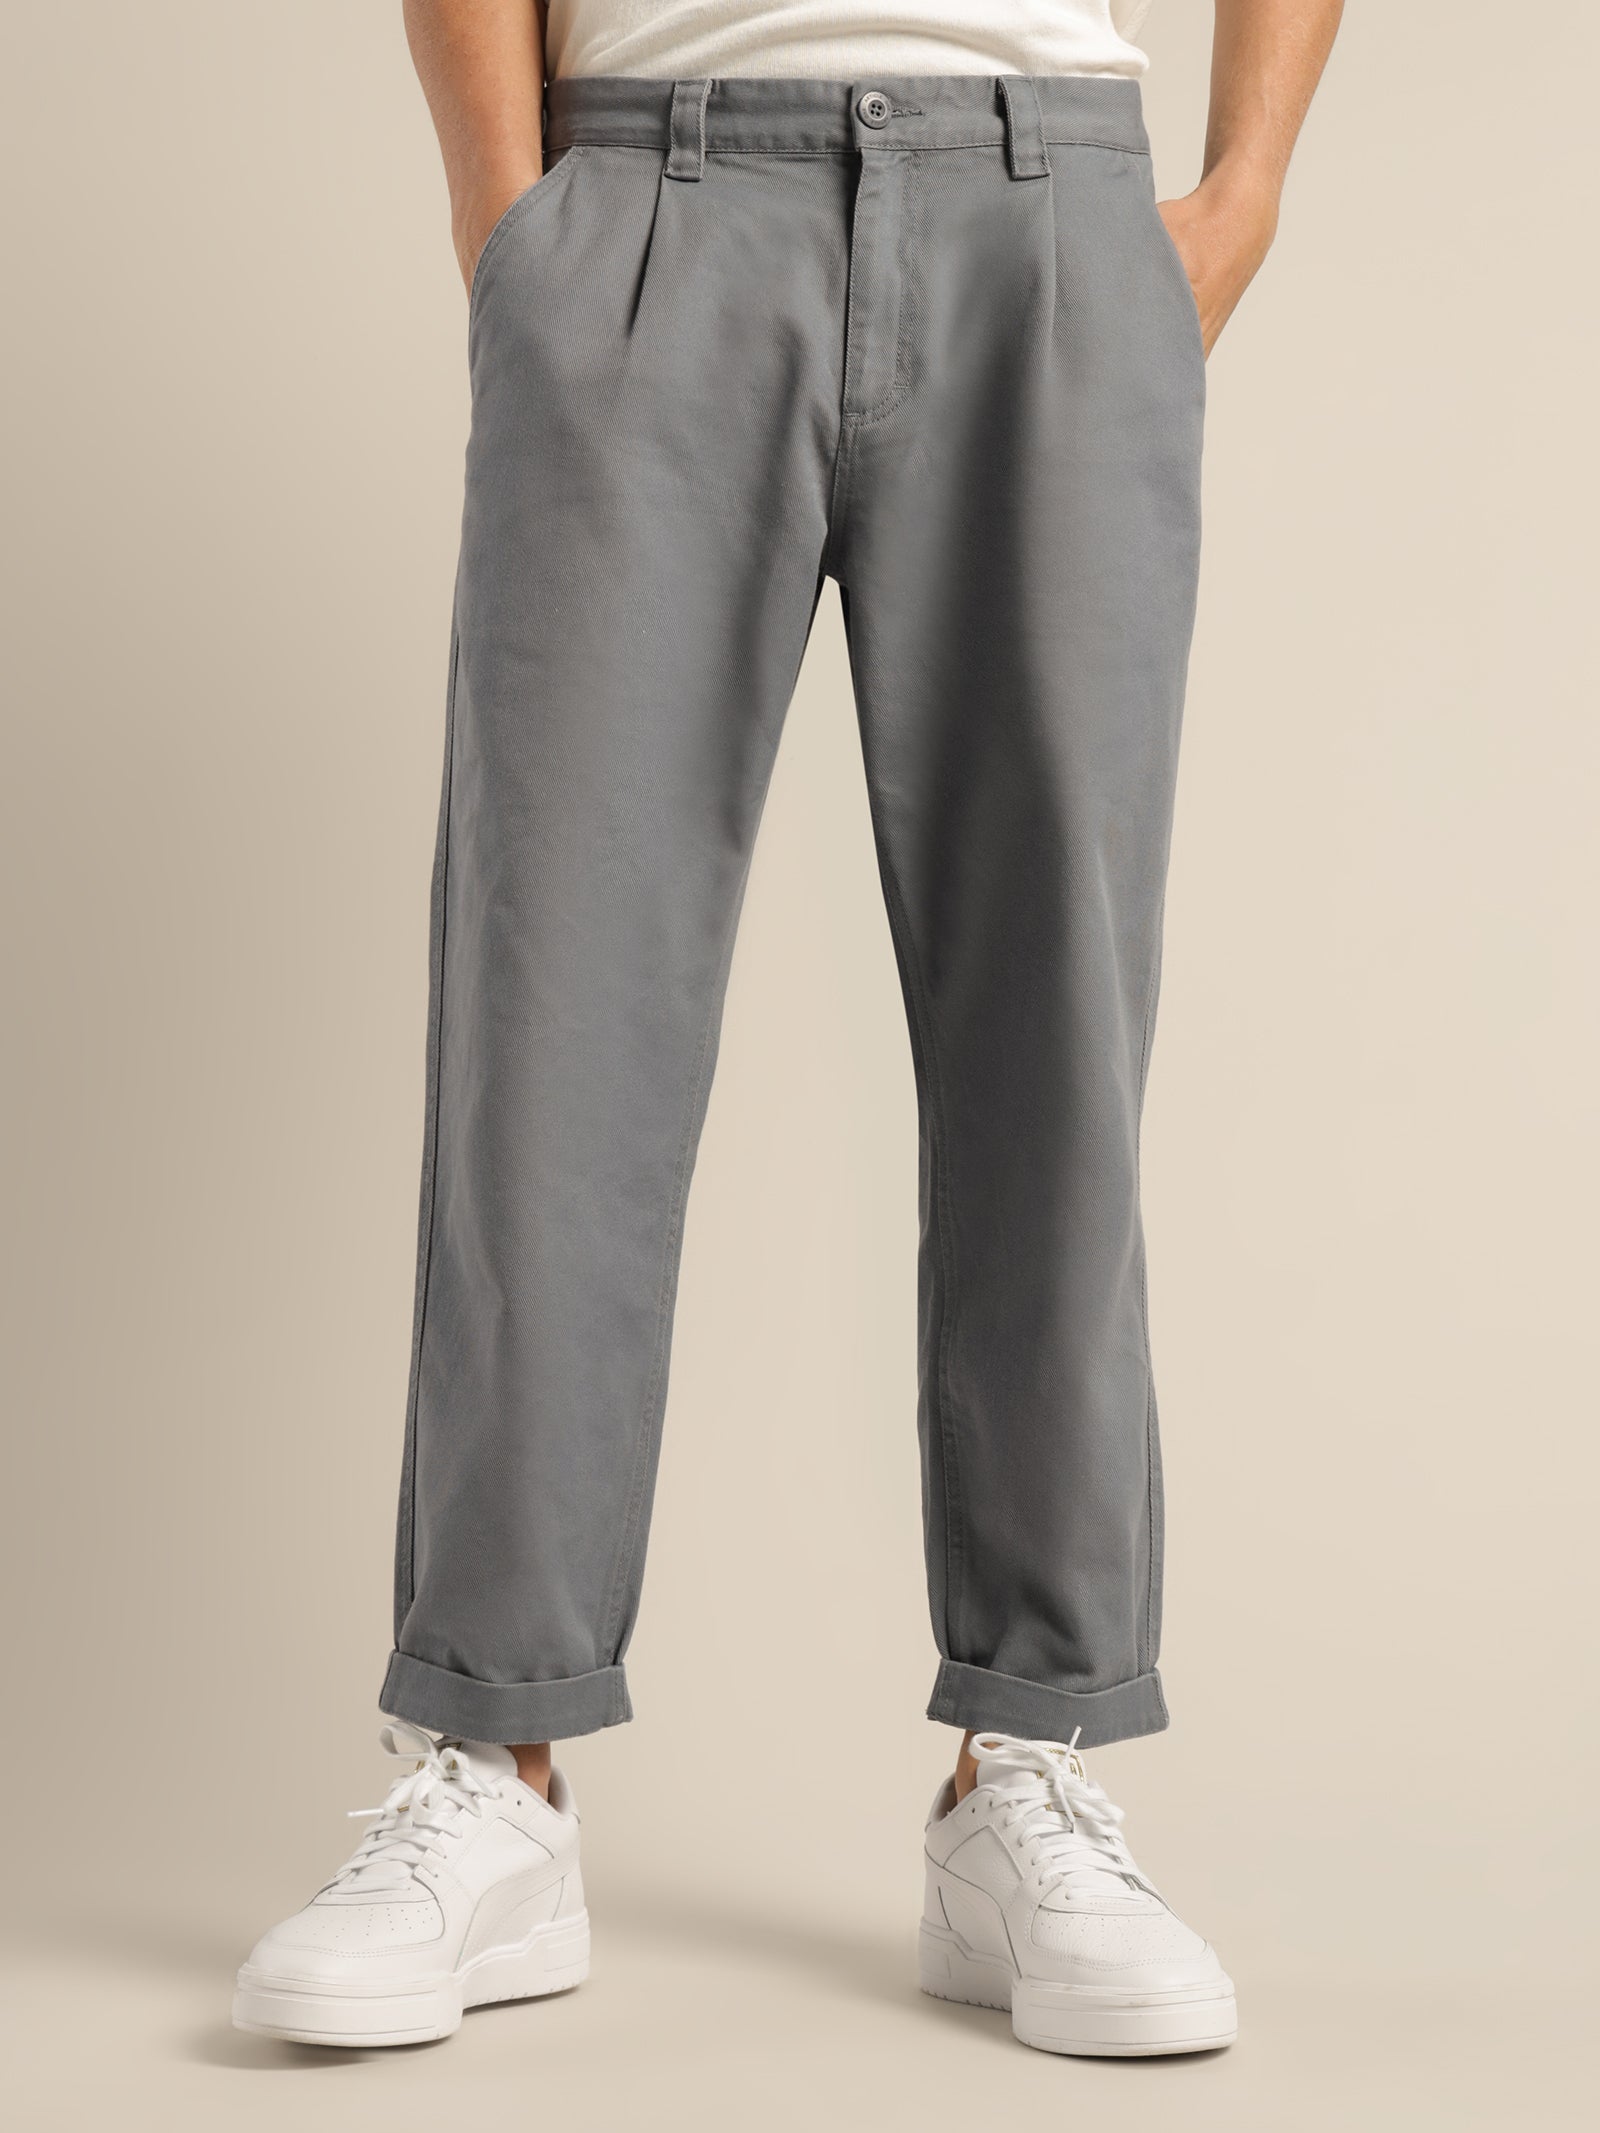 Beau Pants in Mineral Blue - Glue Store